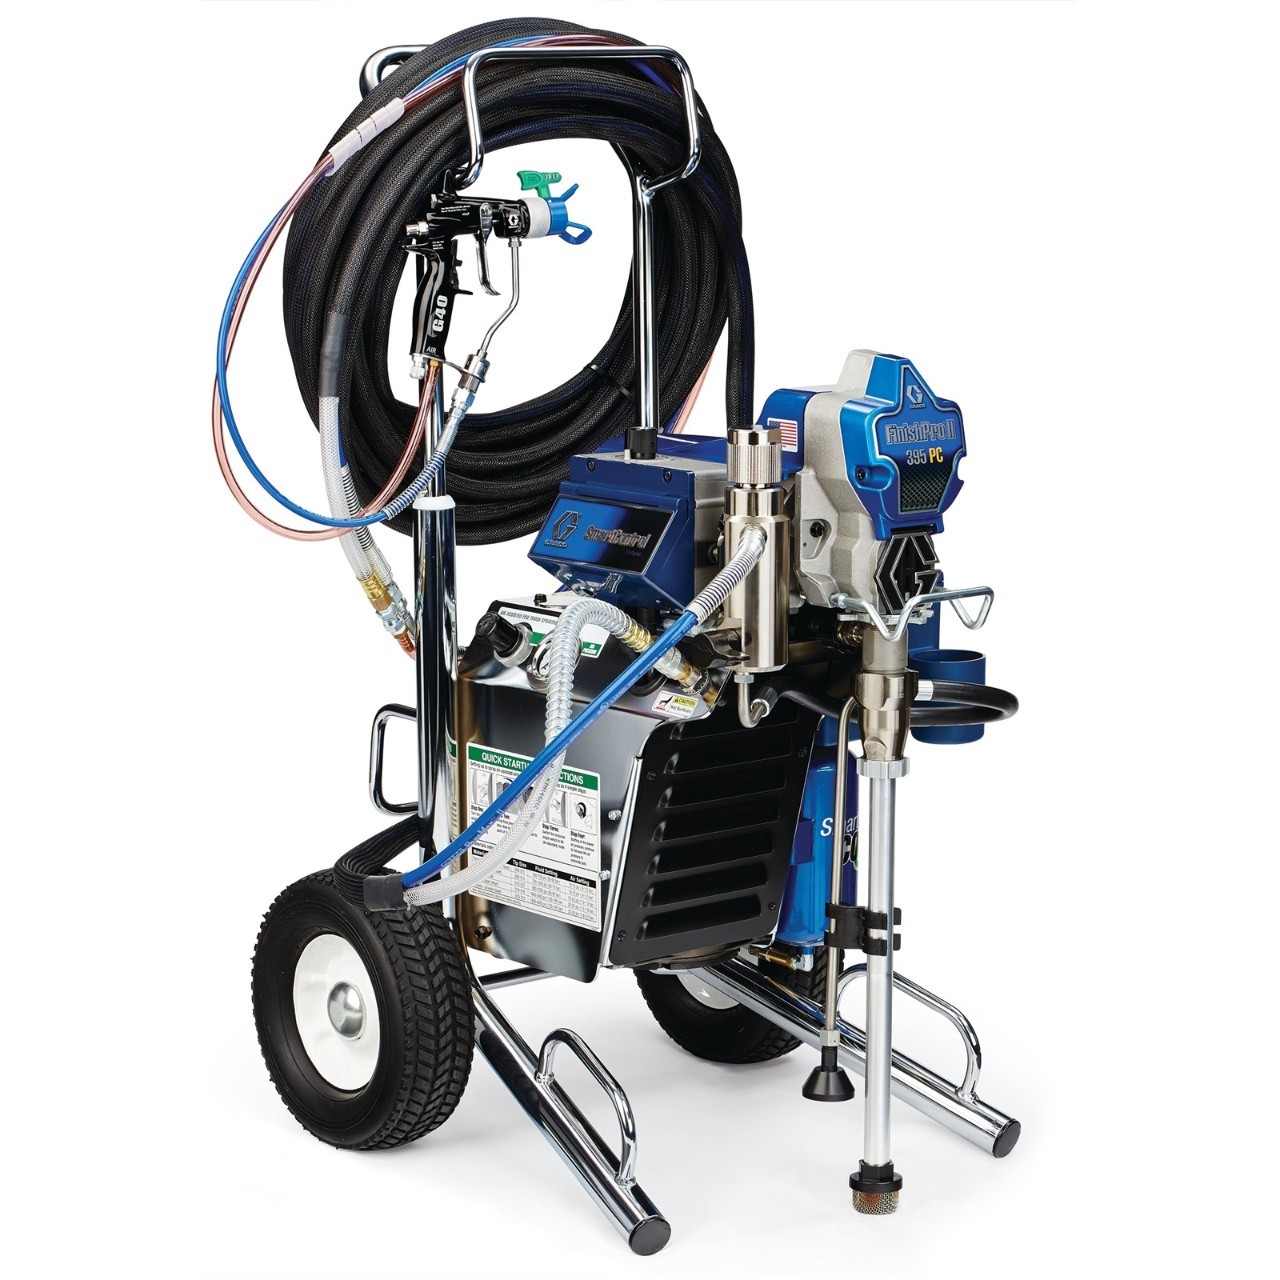 Graco FinishPro II Air-Assisted Airless Sprayers